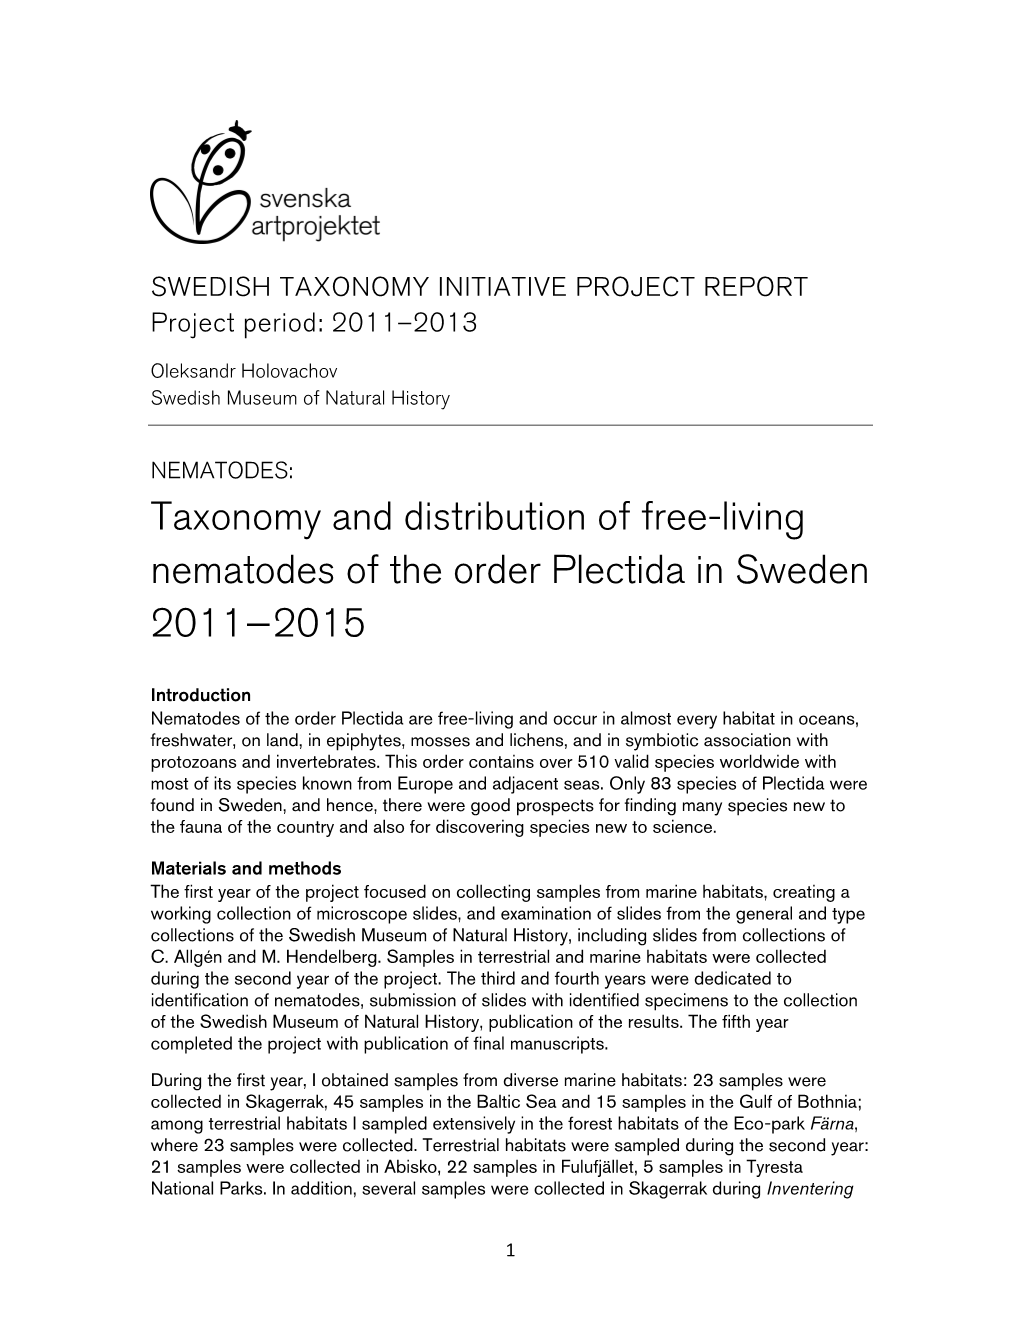 Taxonomy and Distribution of Free-Living Nematodes of the Order Plectida in Sweden 2011−2015